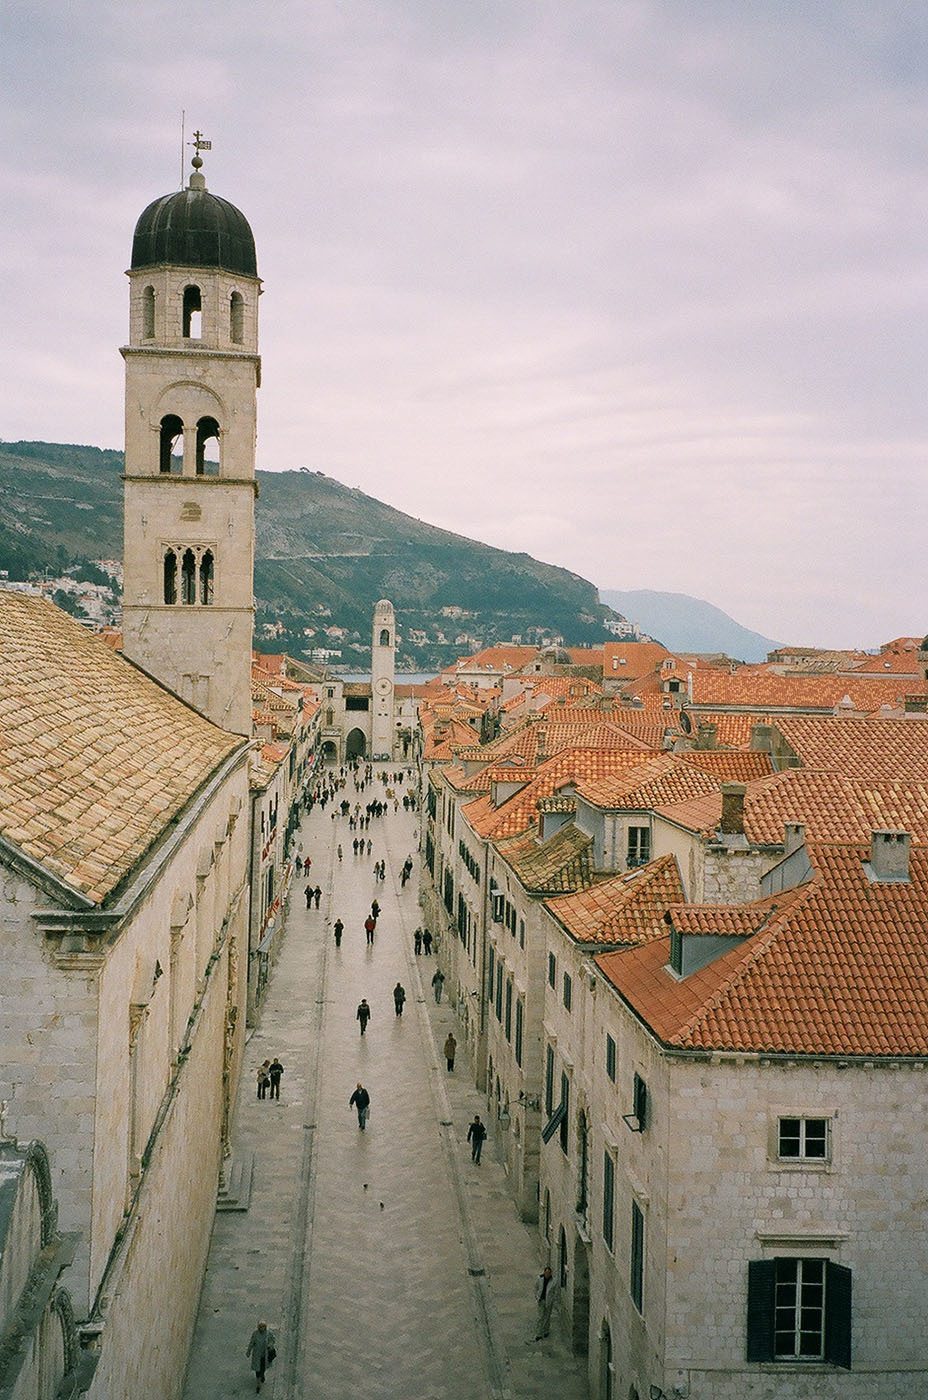 A high view of a central street in the Old Town of Dubrovnik in Croatia